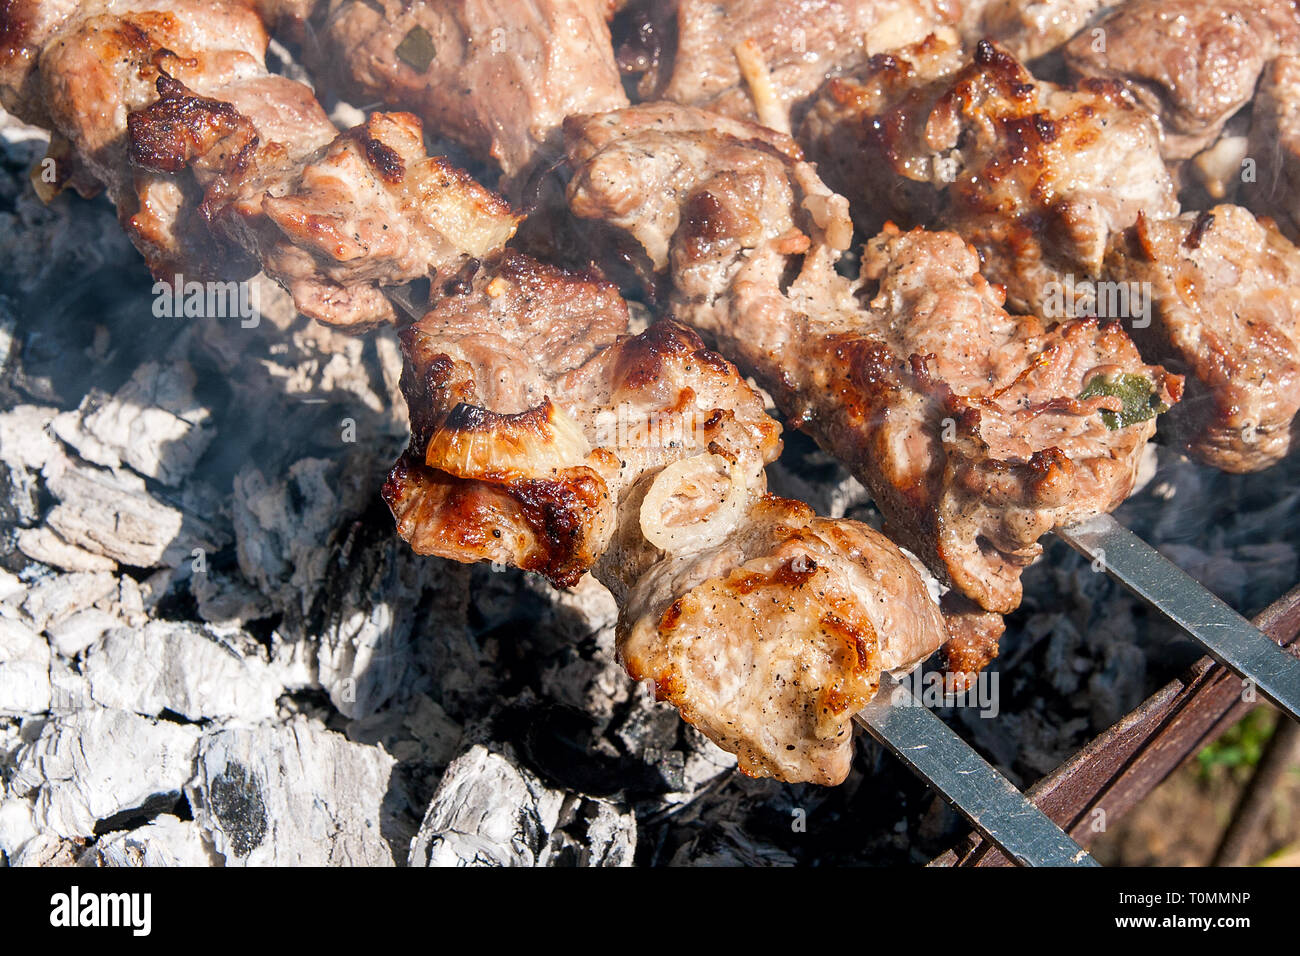 Grilled kebab cooking on metal skewer. Shashlik made of cubes of meat on the skewers during of cooking on the mangal over charcoal outdoors. Grill on  Stock Photo